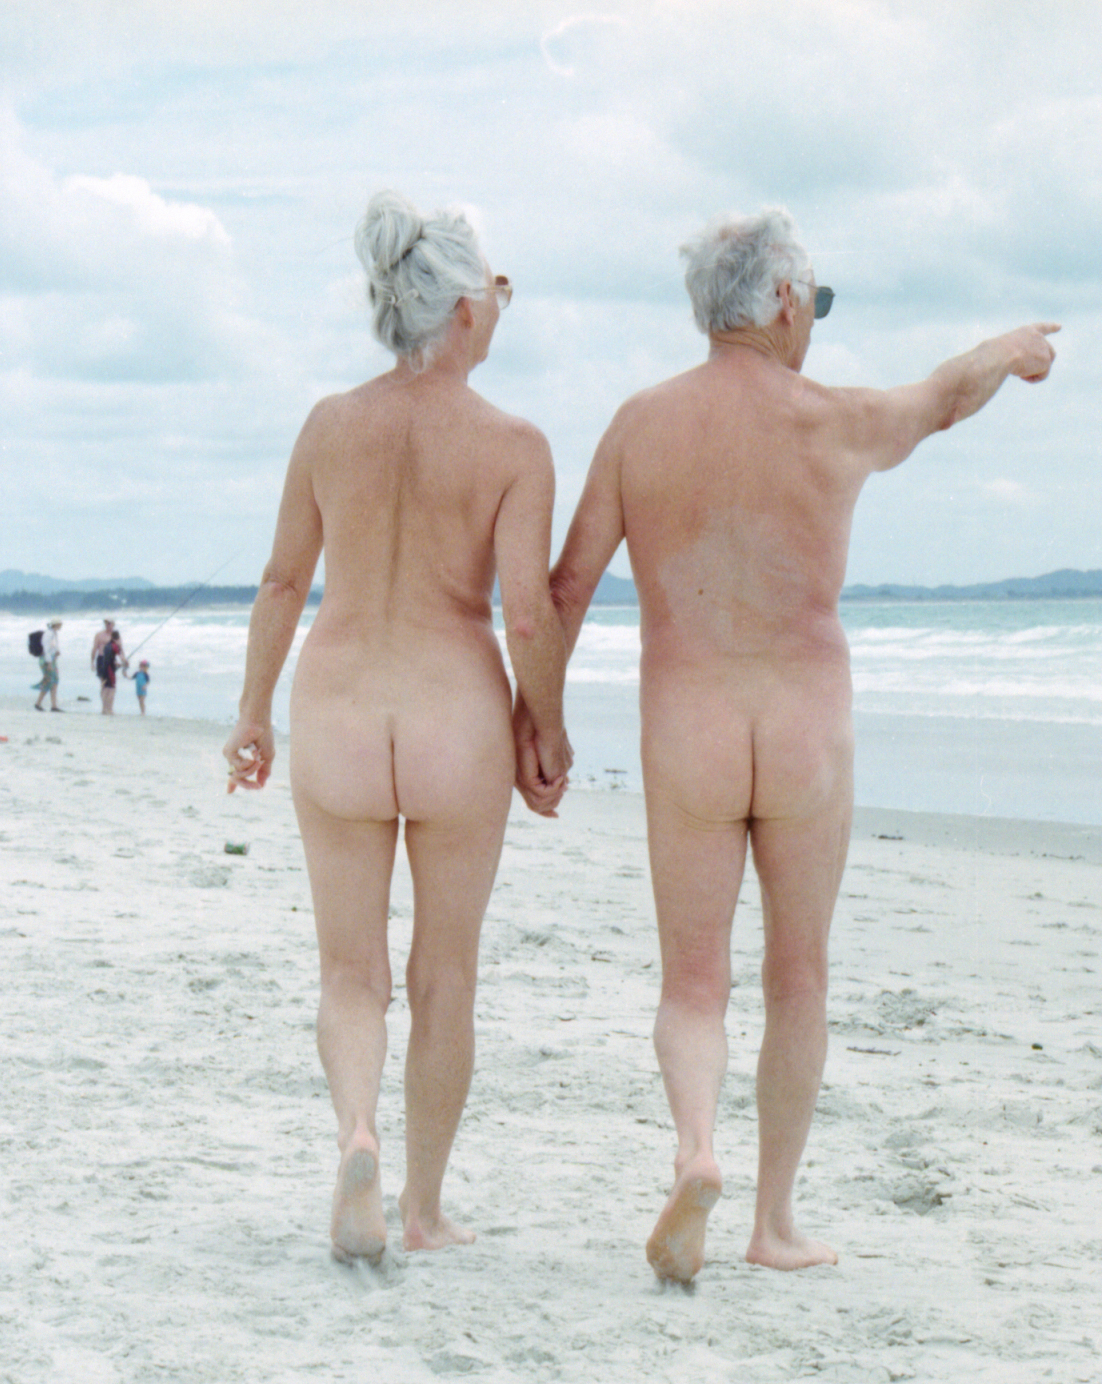 Topless sunbathing on New Zealand beaches: The law and what we really think  - NZ Herald